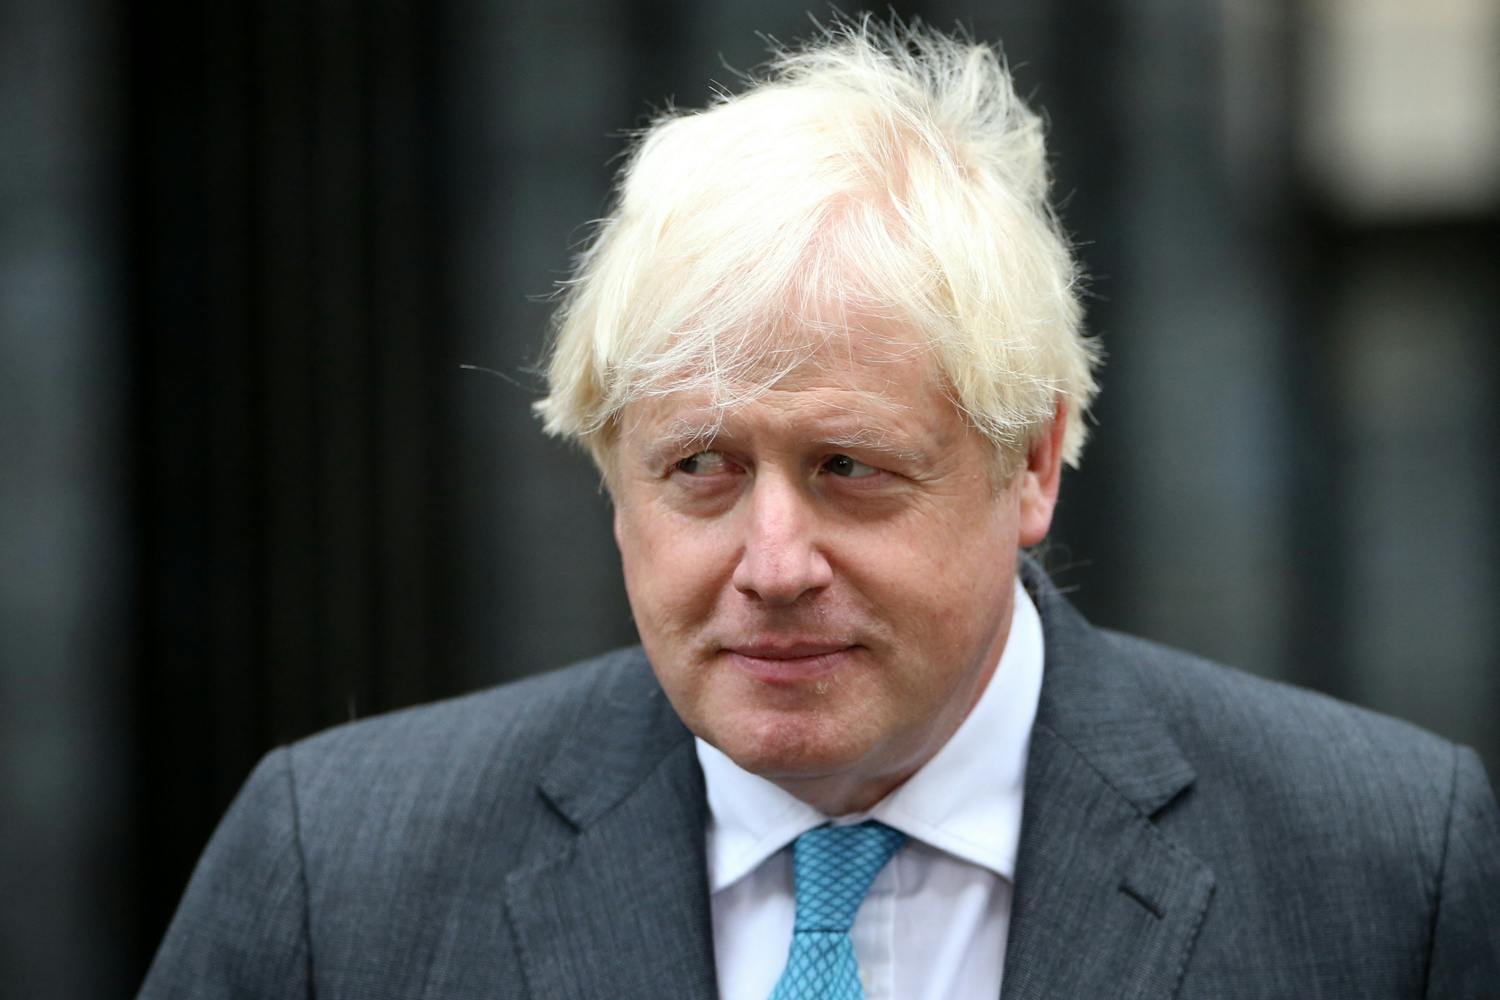 New UK prime minister may have known on Monday: ‘Johnson was at the forefront’